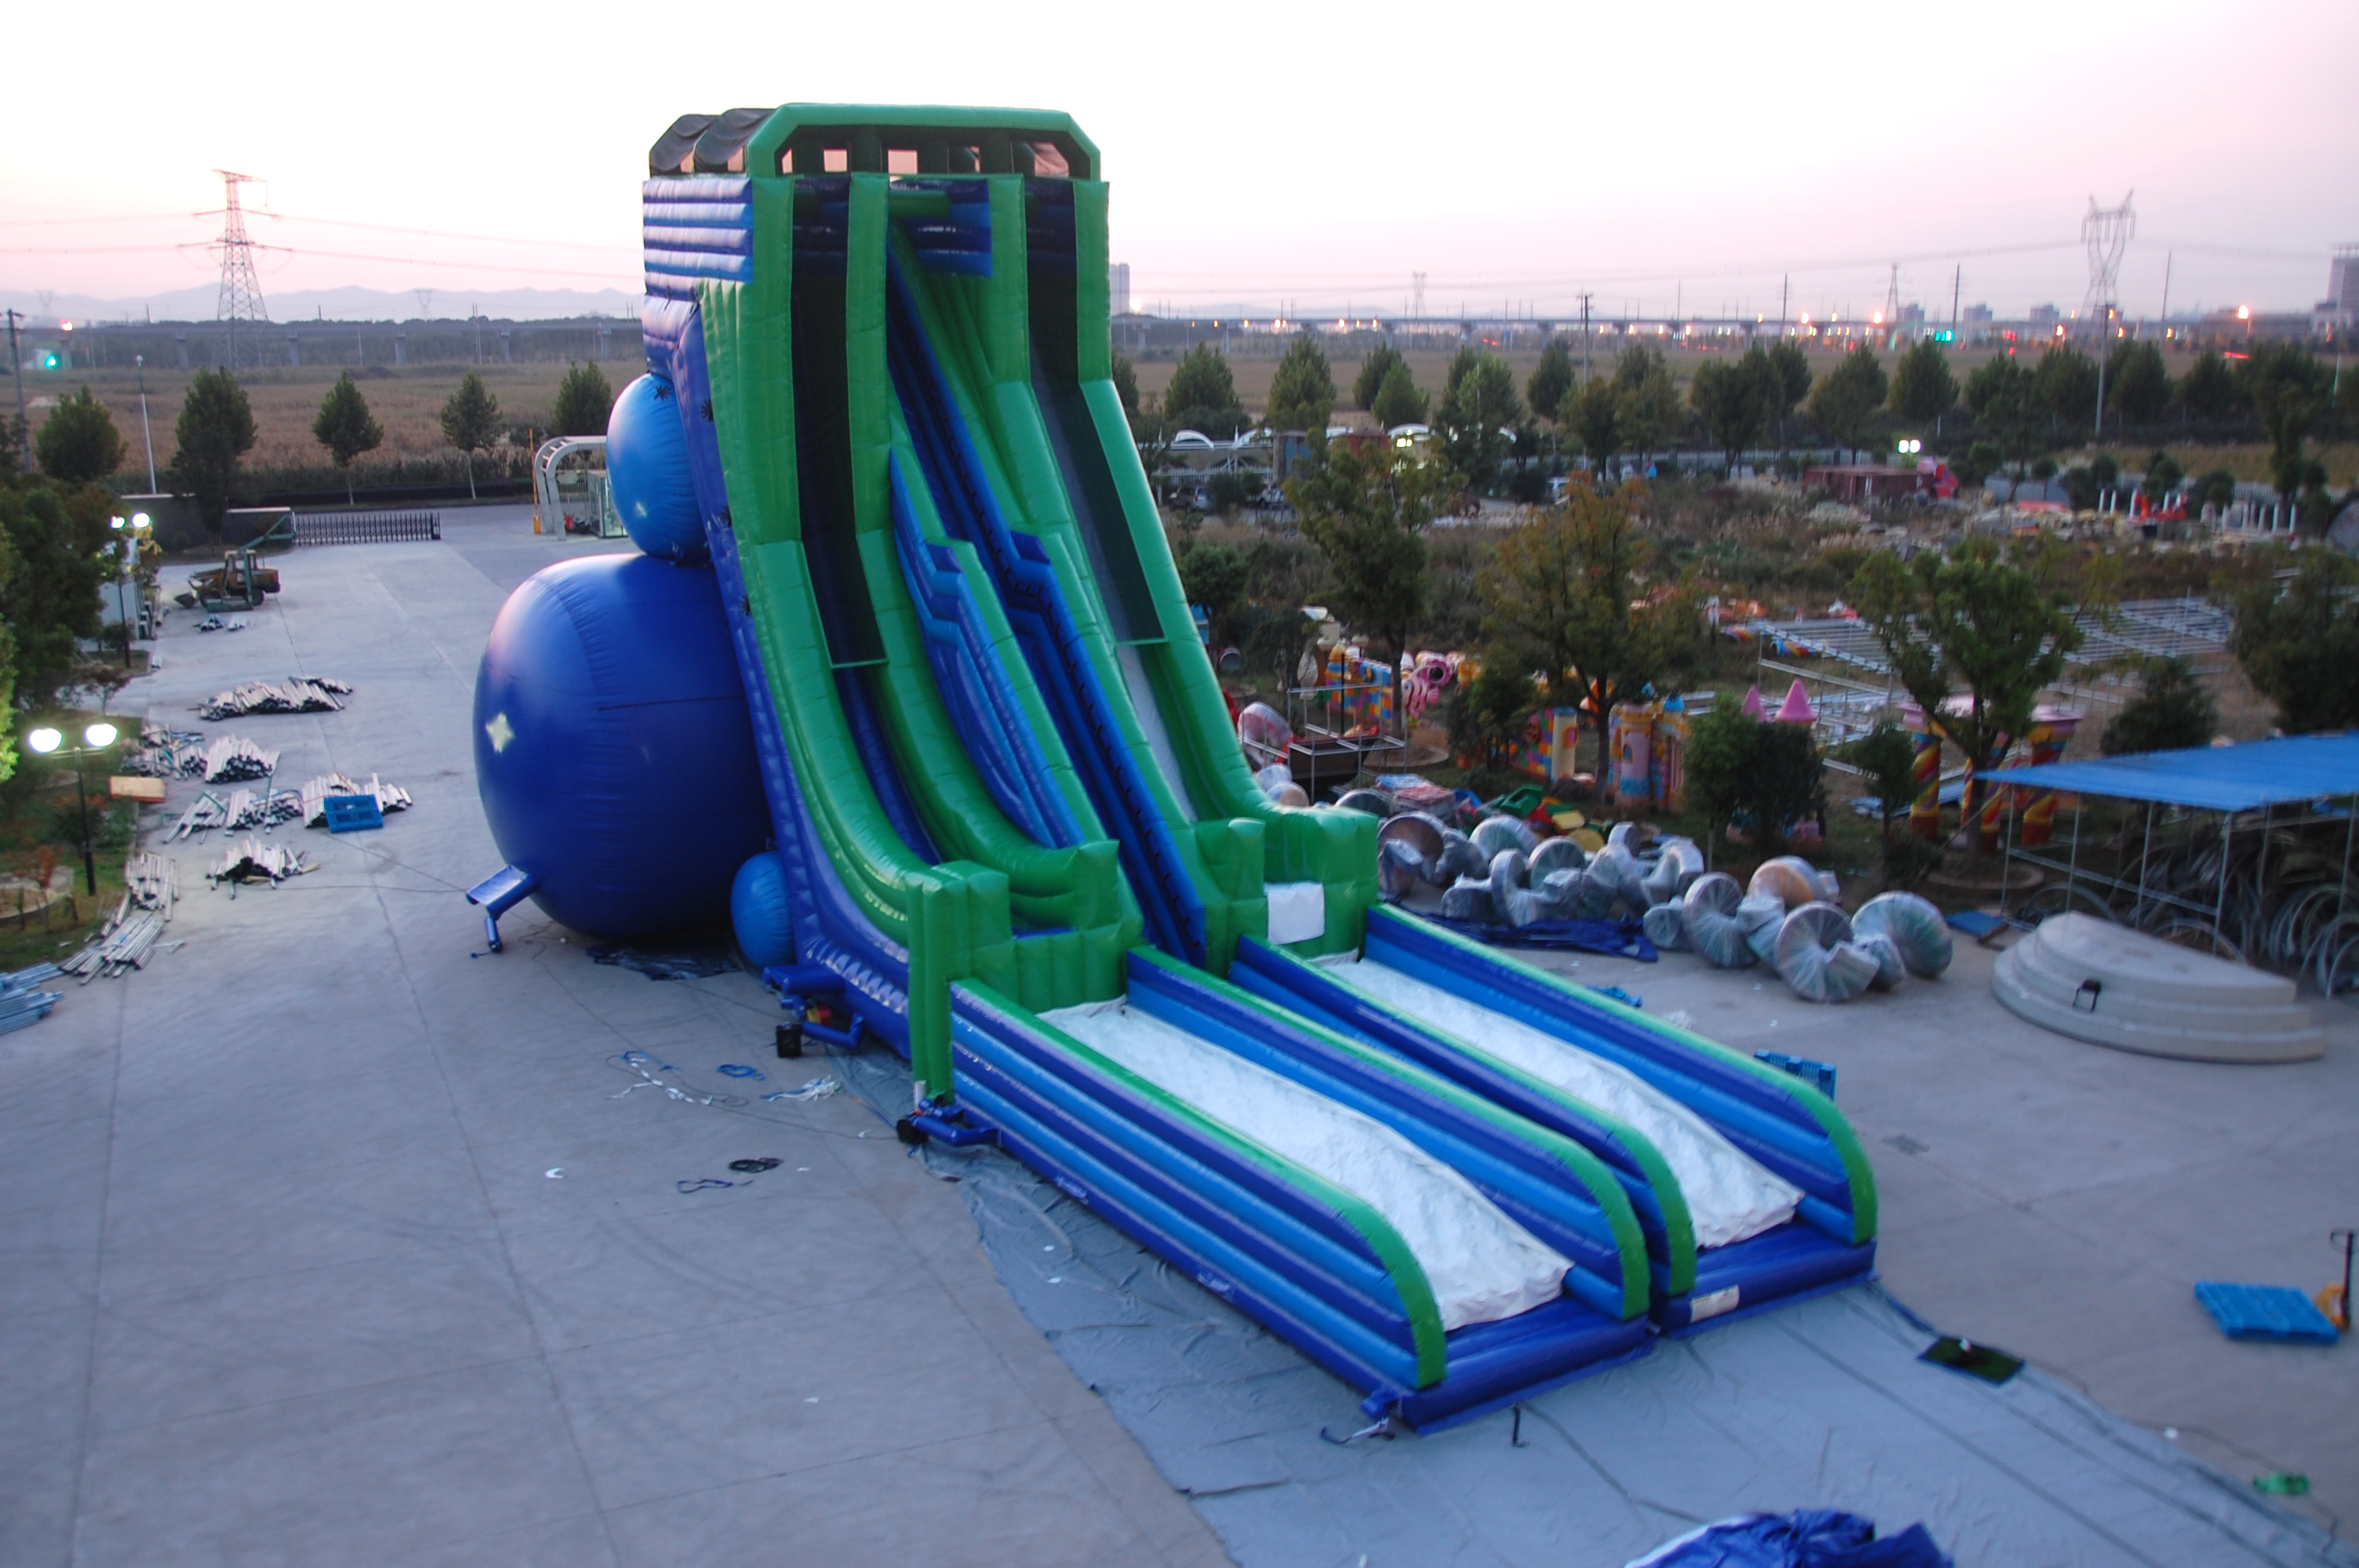 Inflatable 2000 Launches World’s Tallest Inflatable Wet/Dry Slide at